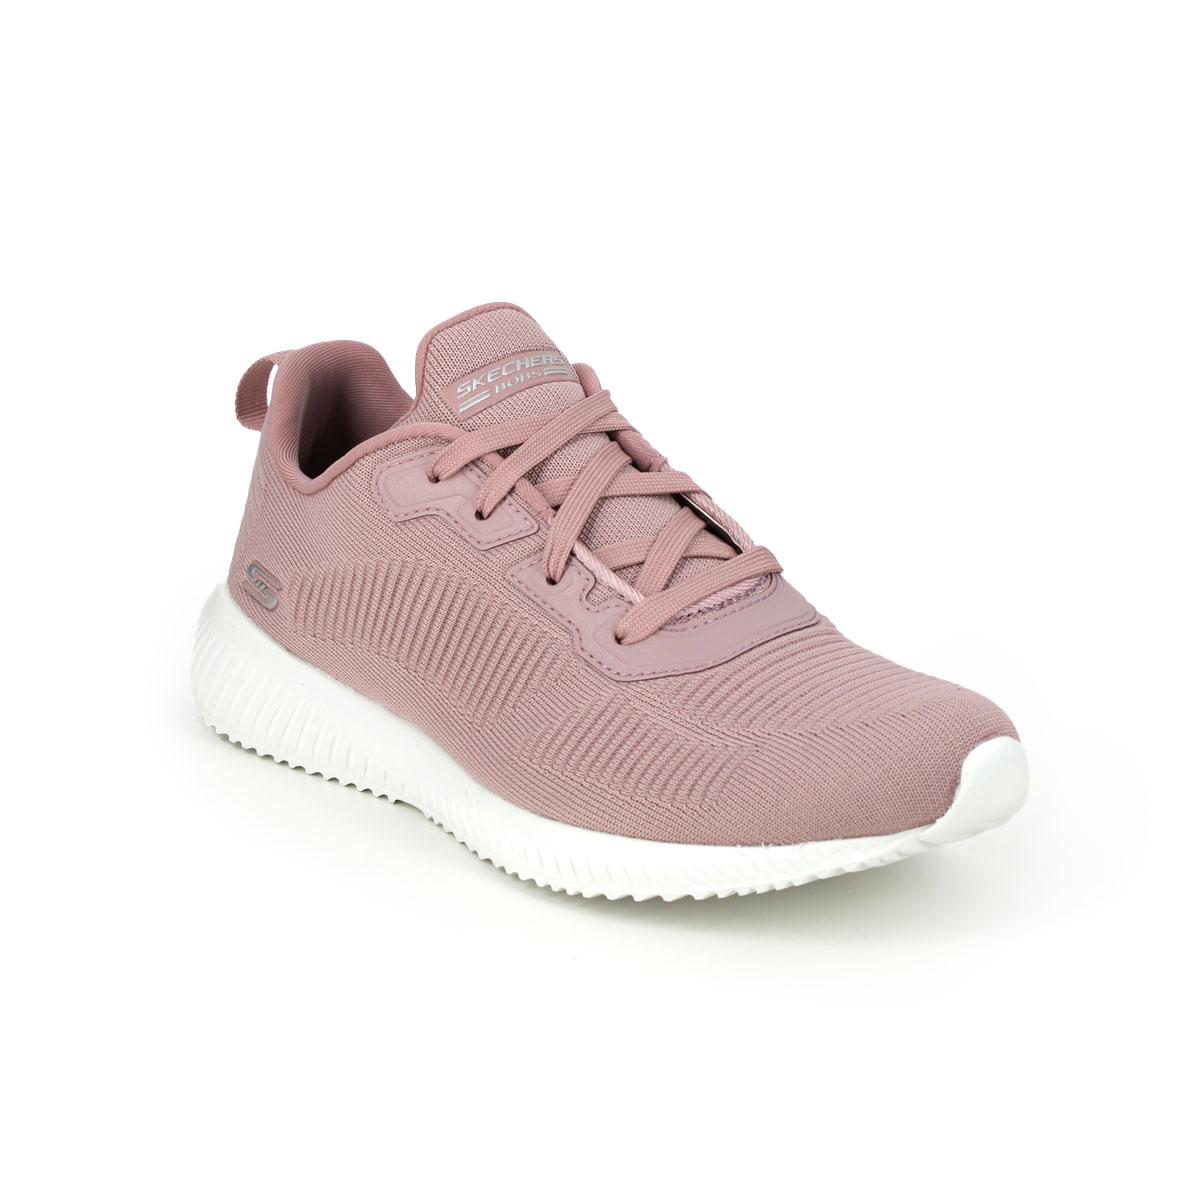 Skechers Bobs Squad BLSH Blush Pink Womens trainers 32504 in a Plain Textile in Size 4